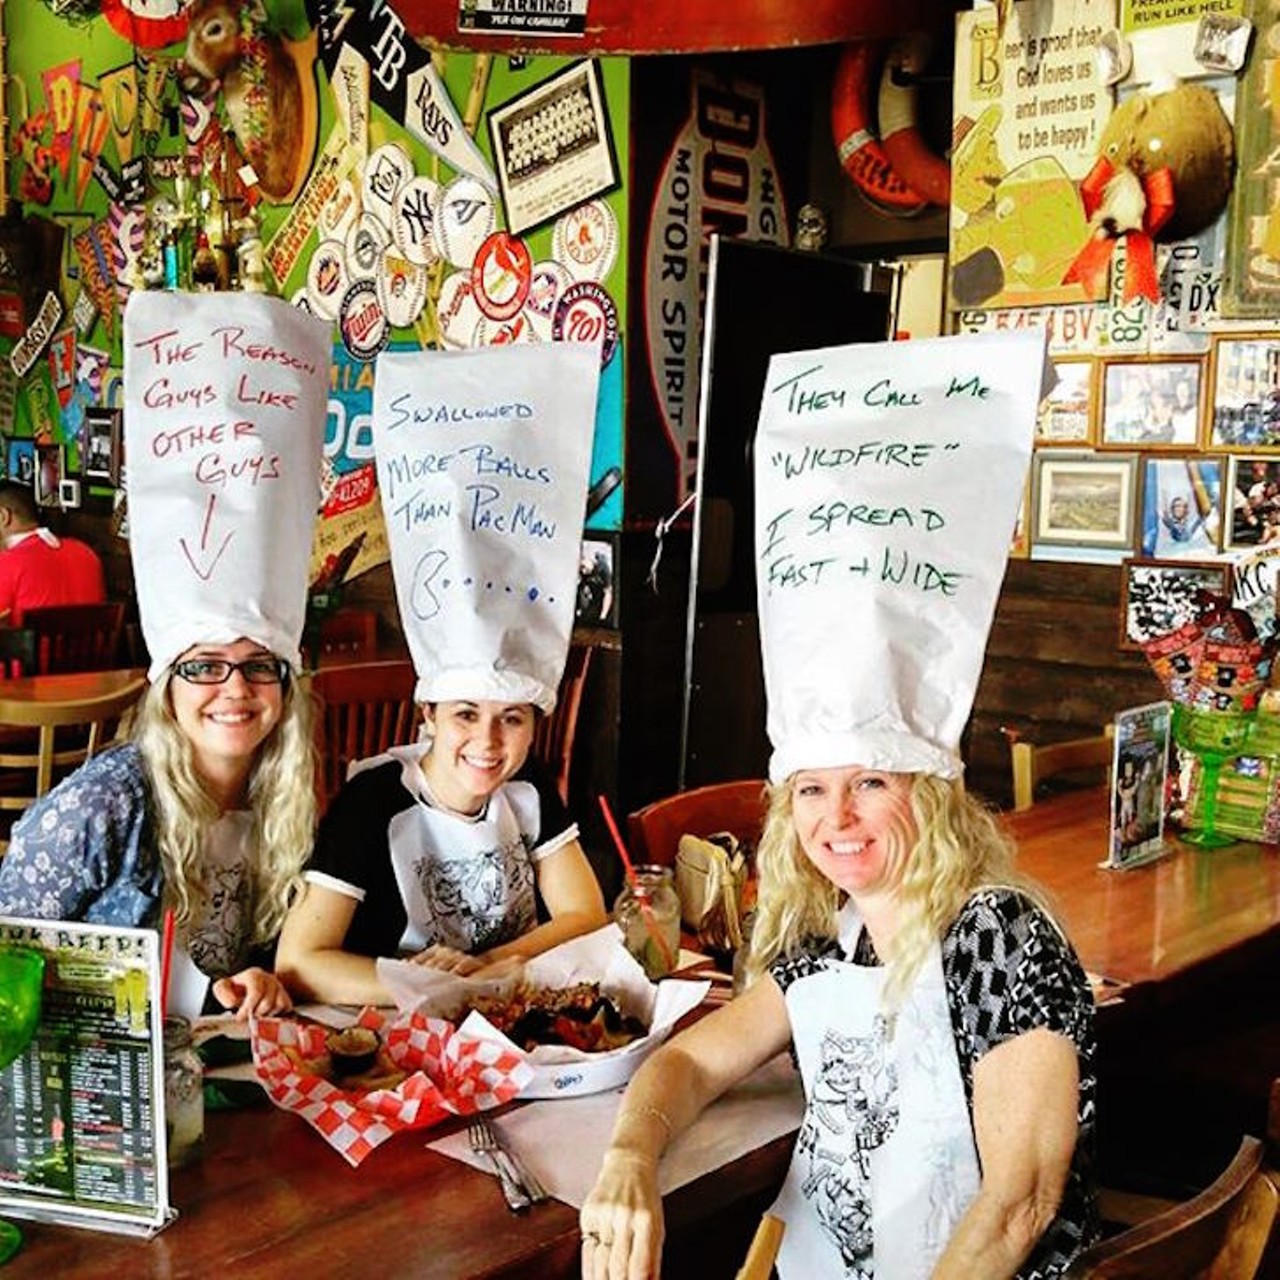 Dick&#146;s Last Resort
8201 Vineland Ave. | 321-329-3002
The waiters write things like &#147;taken more loads than a Maytag washer&#148; on tall hats, then put them on the patrons. If you&#146;ve got a good sense of humor (and maybe nerves of steel), then go ahead and have it out with the surly servers of Dick's while they bring you a hot plate of BBQ pork ribs.
Photo via cassandraskyyy/Instagram